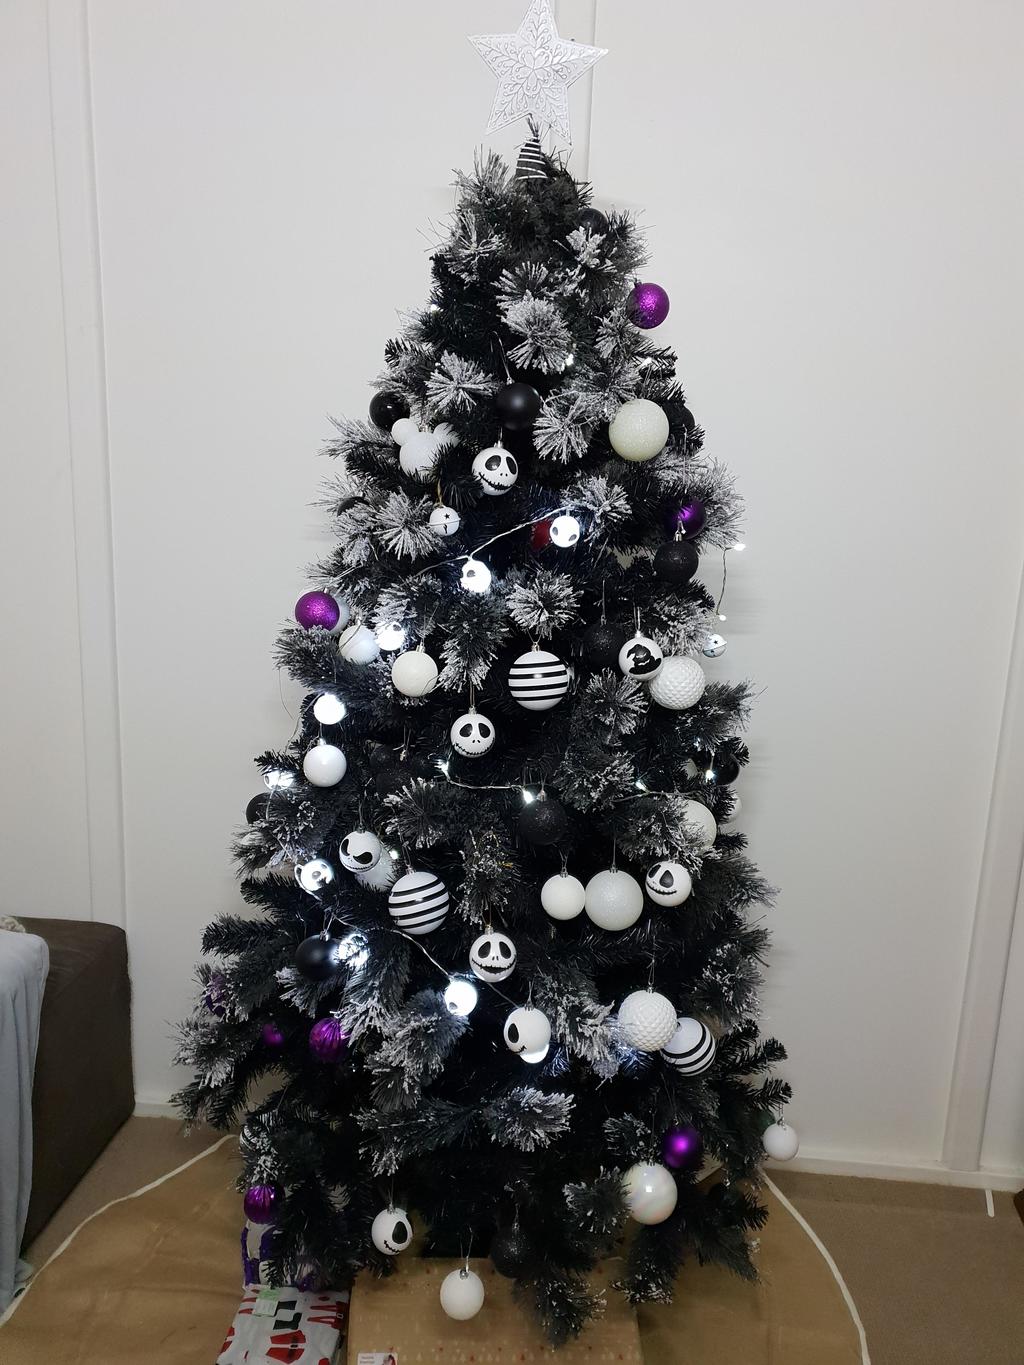 A black and white christmas tree decorated with ornaments
